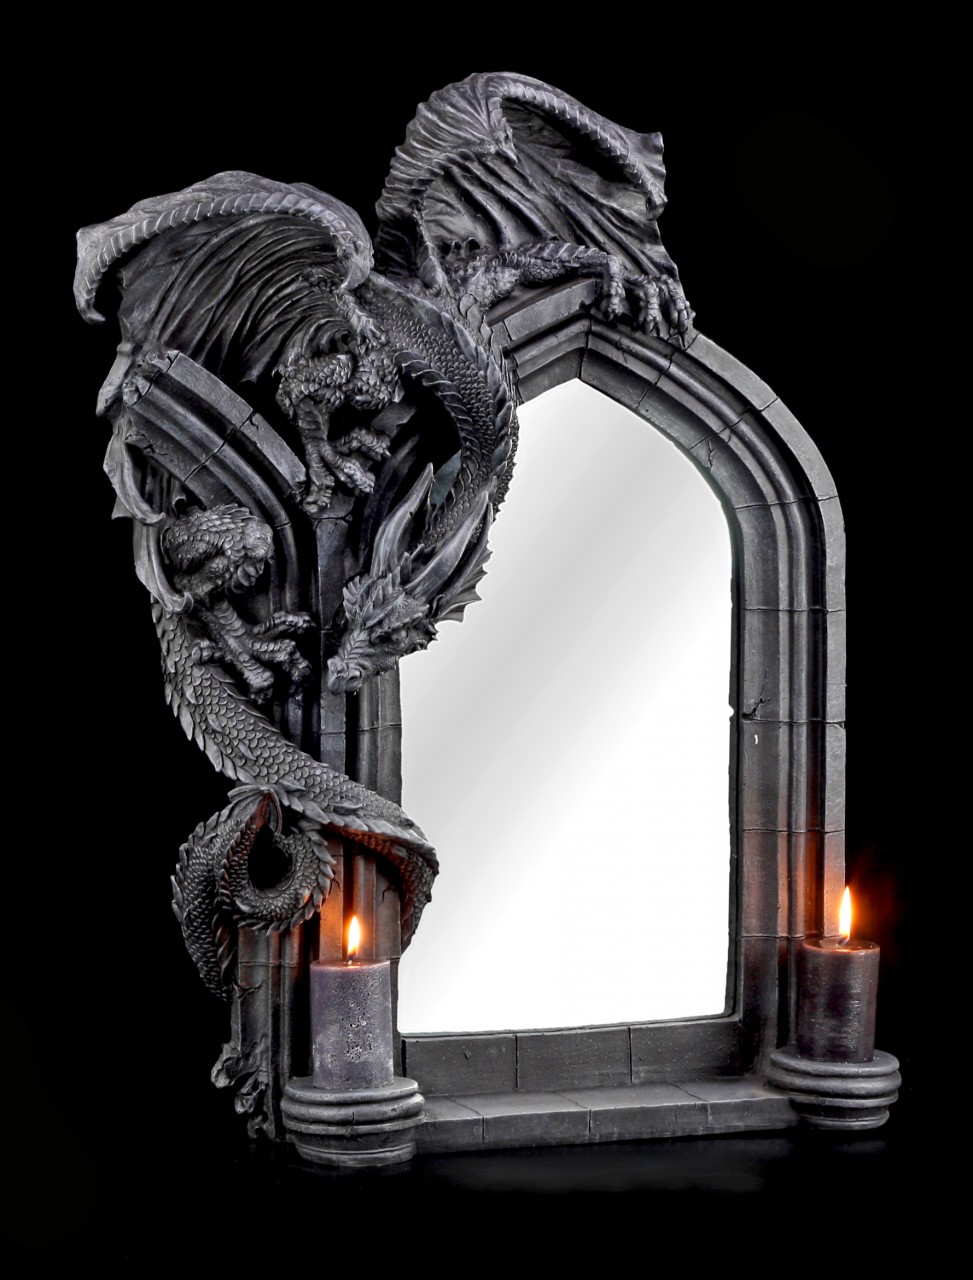 Large Dragon Mirror with Candlesticks